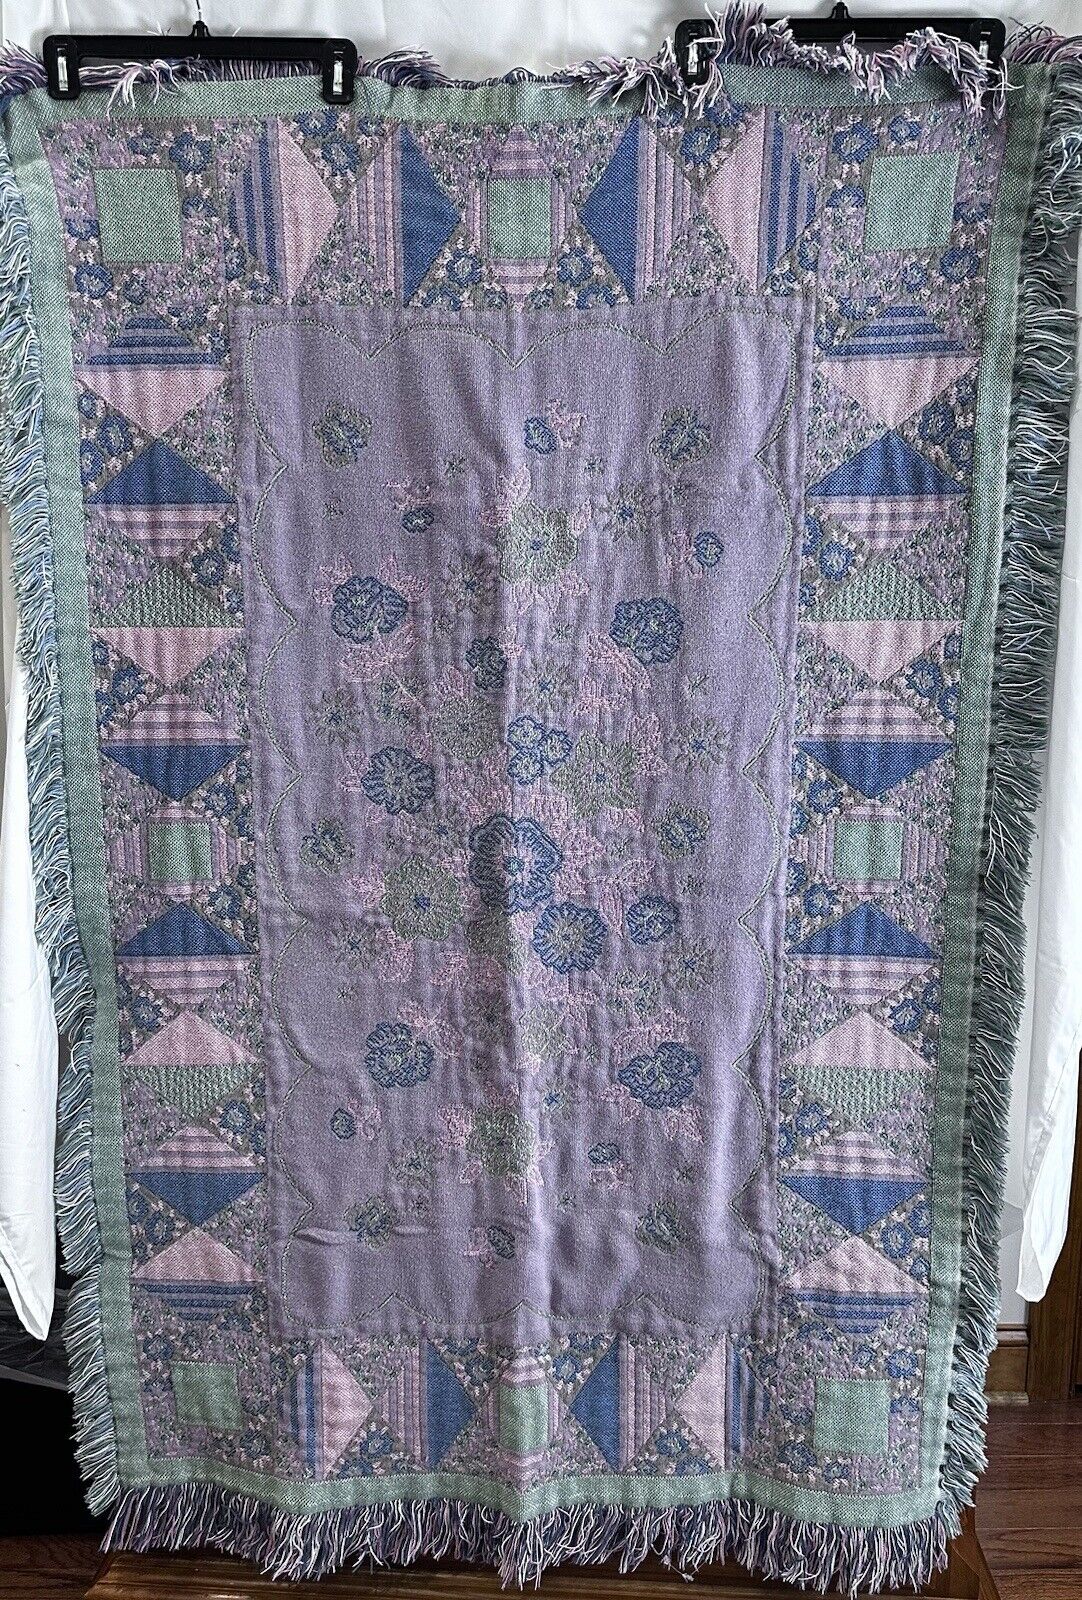 Vintage Woven Tapestry Blanket Patchwork Pattern Blue/Lilac/Green 42.5 X 66